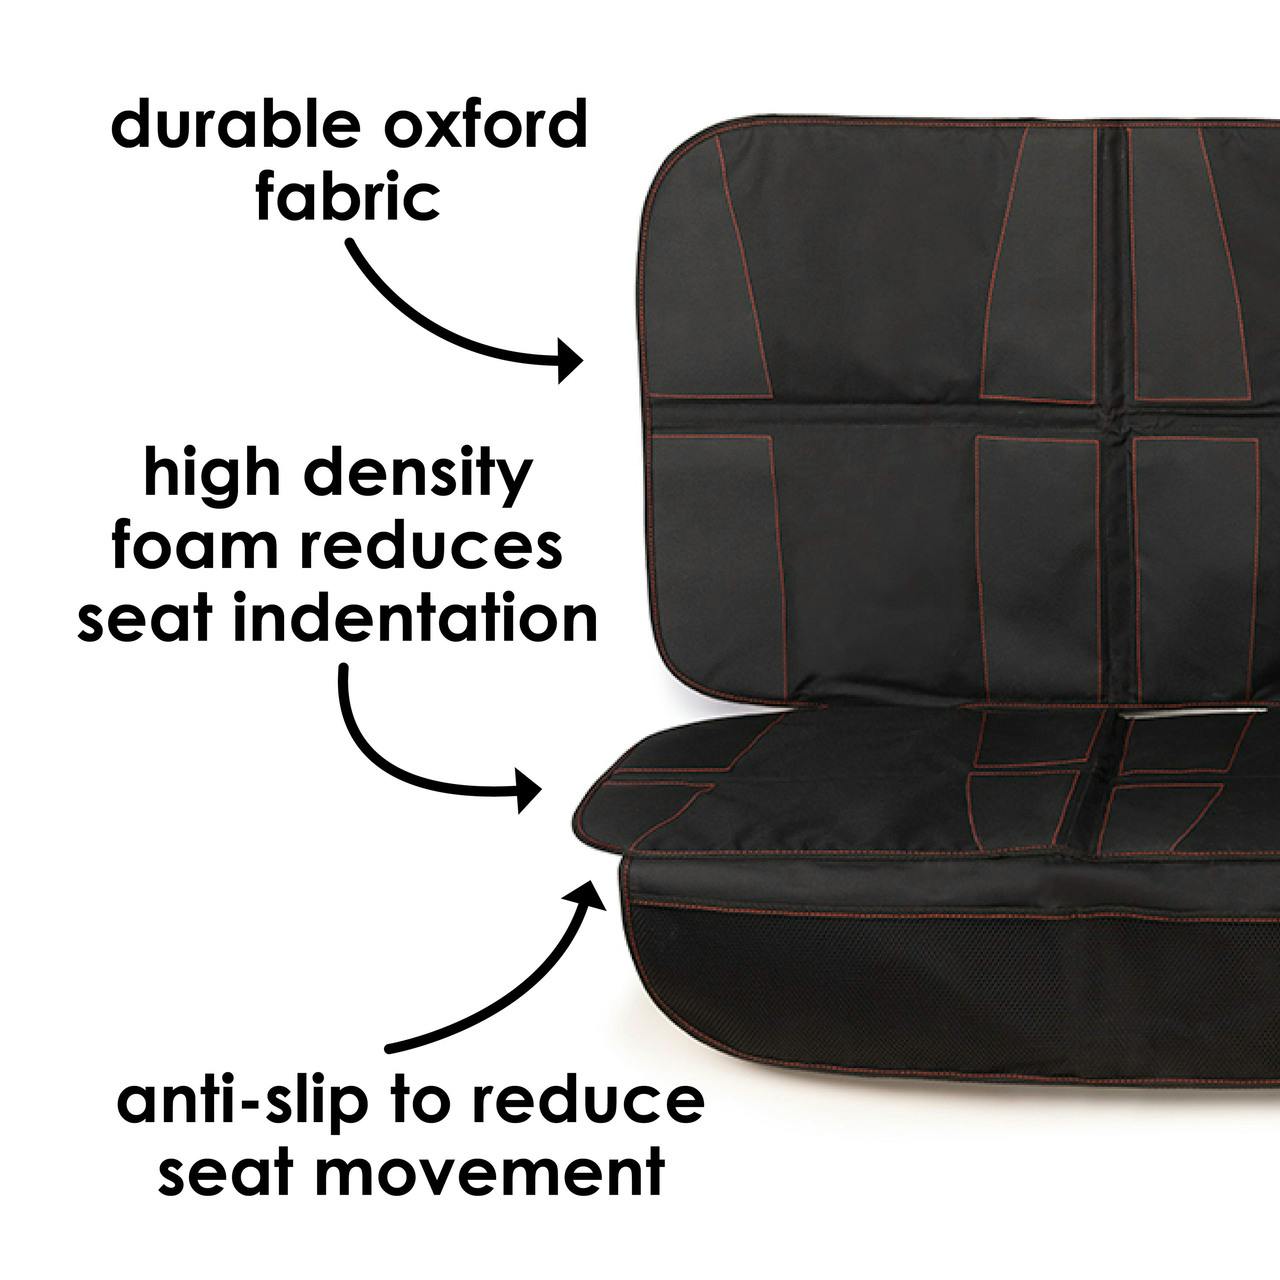 Diono Ultra Mat 3 Across Seat Protector